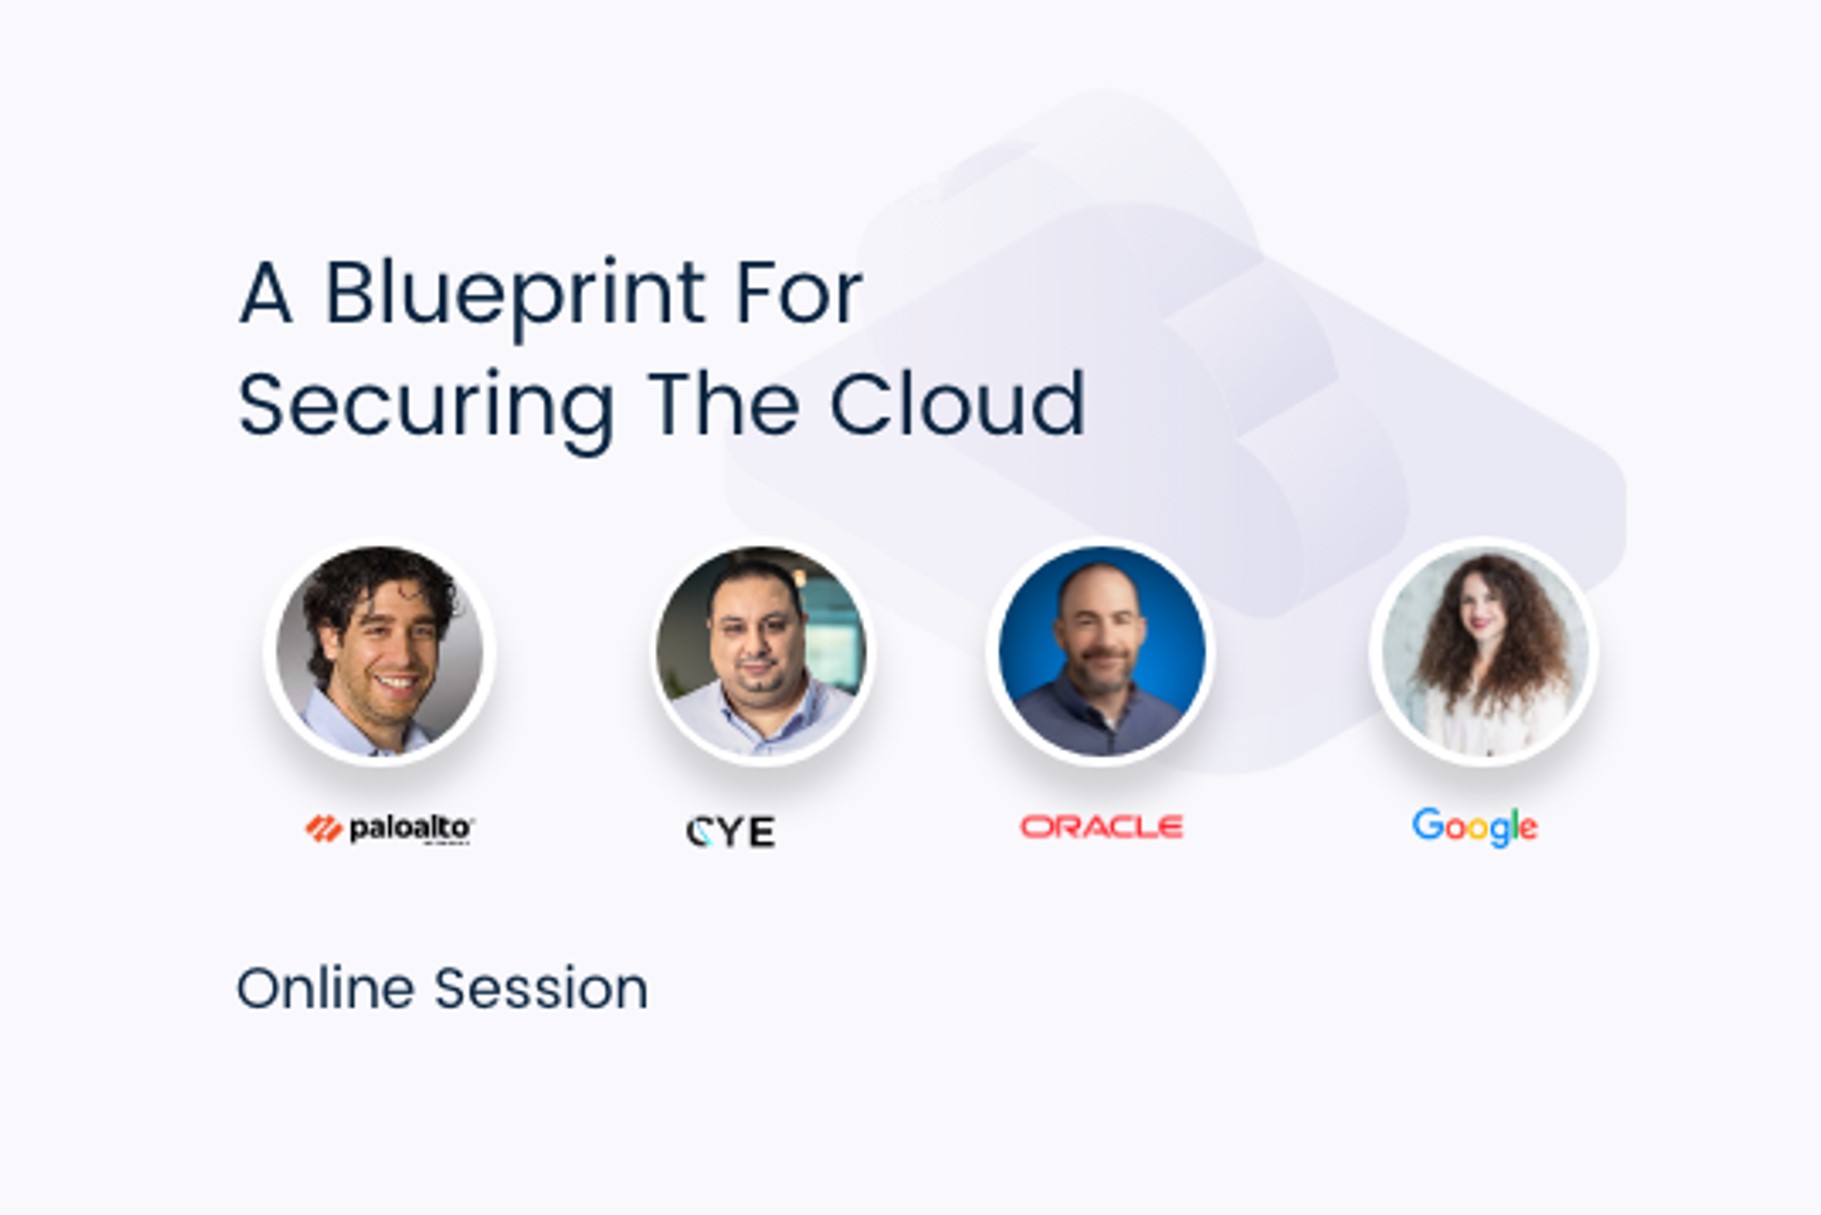 A Blueprint for Securing the Cloud